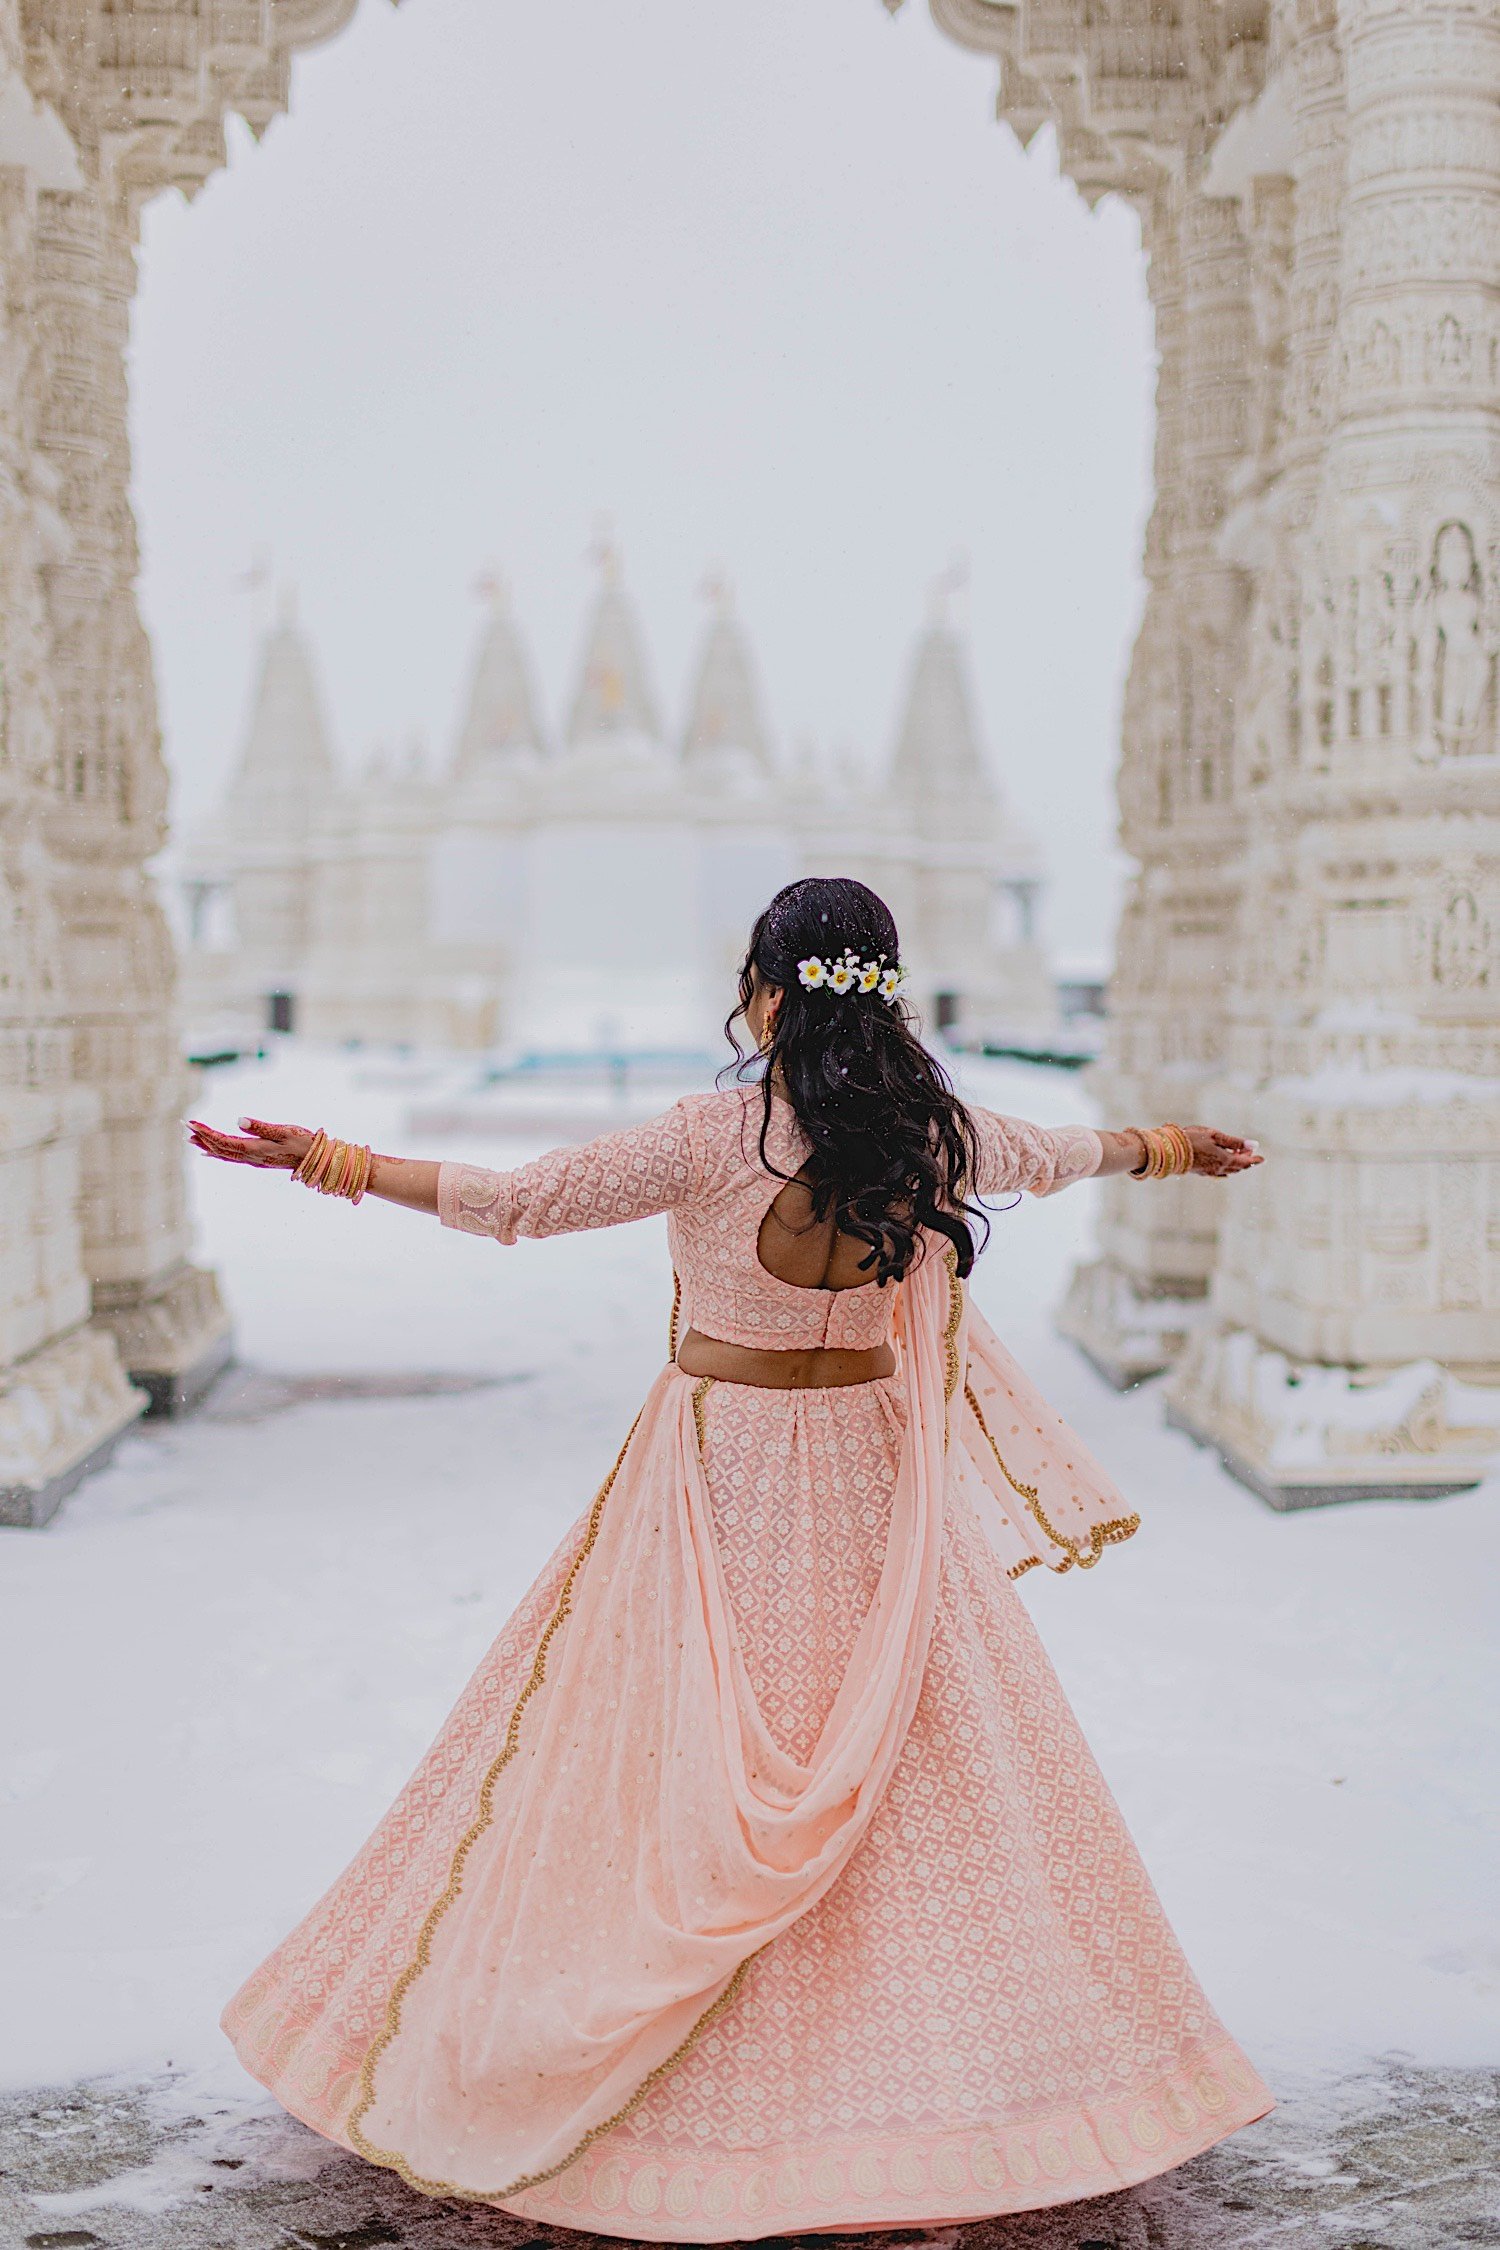 Bride wearing traditional Indian wedding dress dances in the snow